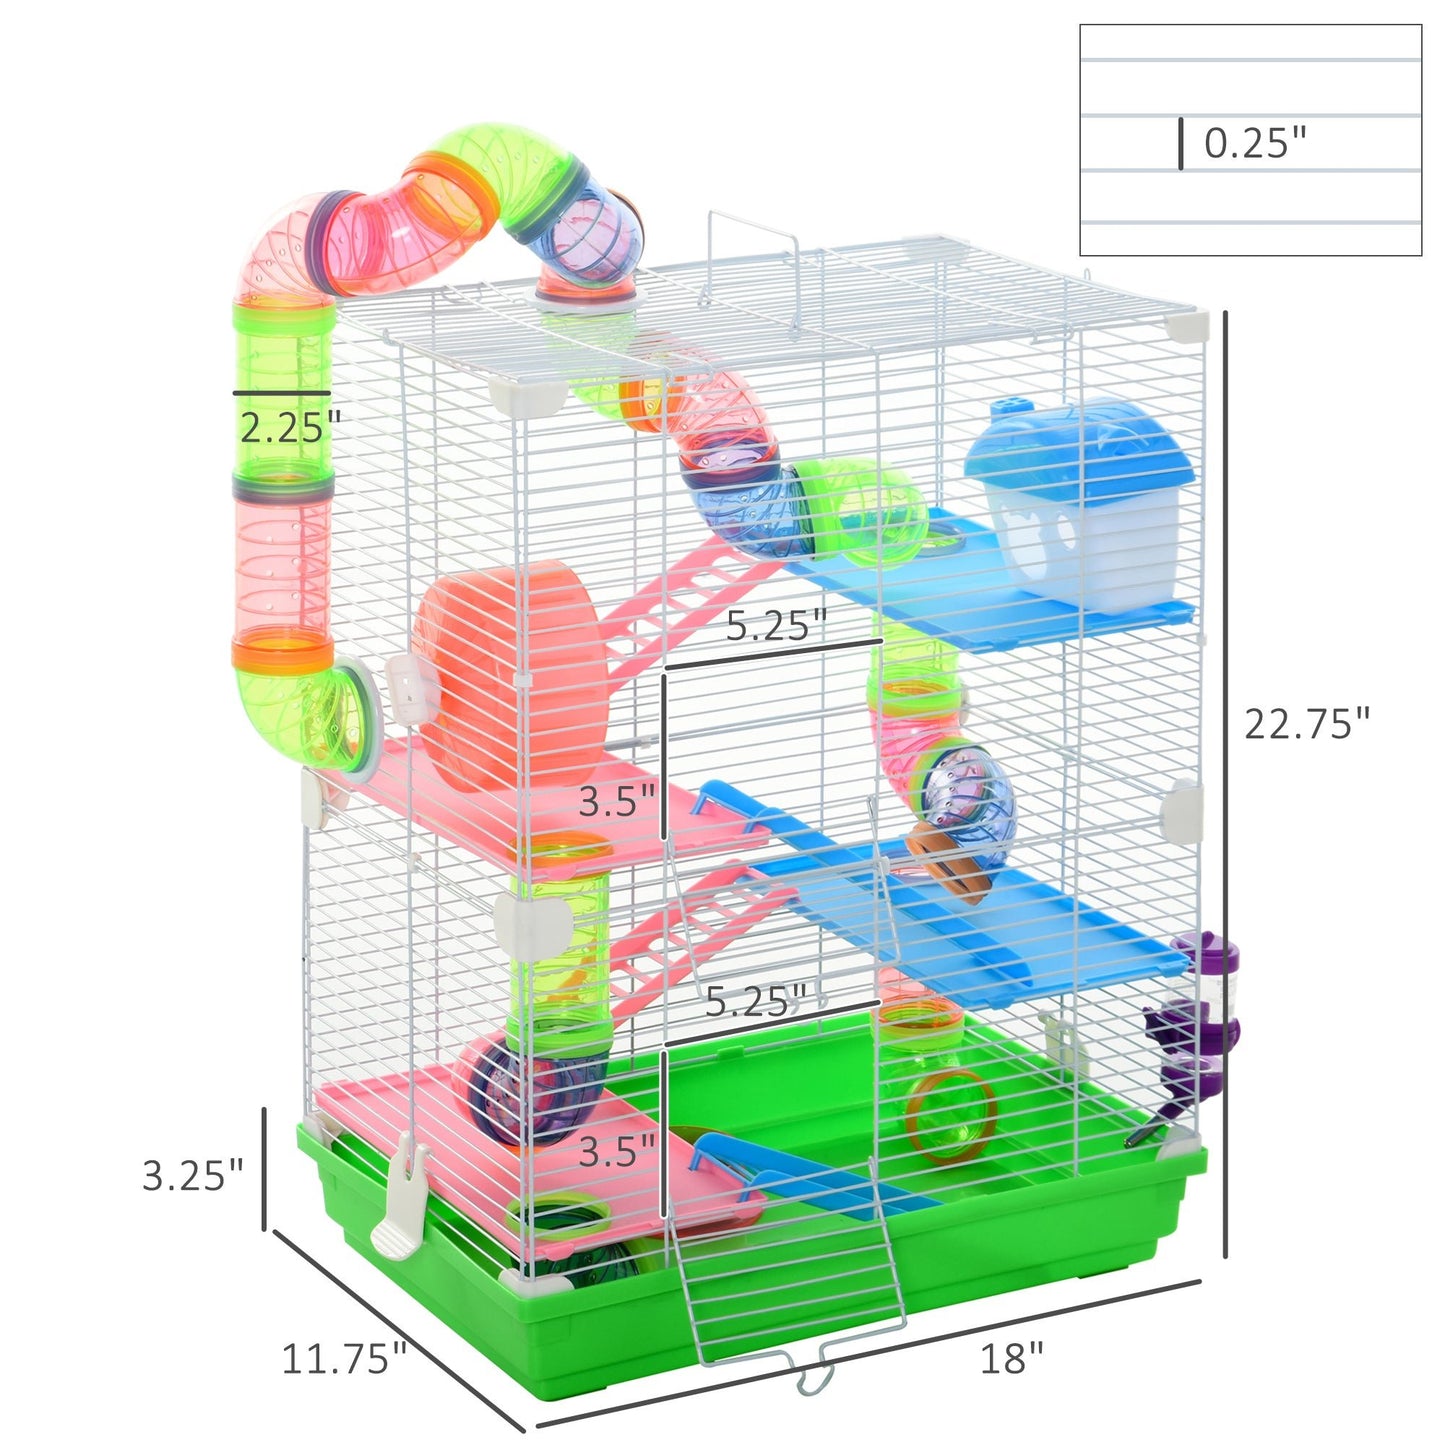 AOSOM-18" 5 Tier Hamster Cage with Tubes and Tunnels, Small Animal Cage with Portable Carry Handle, Rat Gerbil Cage with Water Bottle, Food Dish - Outdoor Style Company